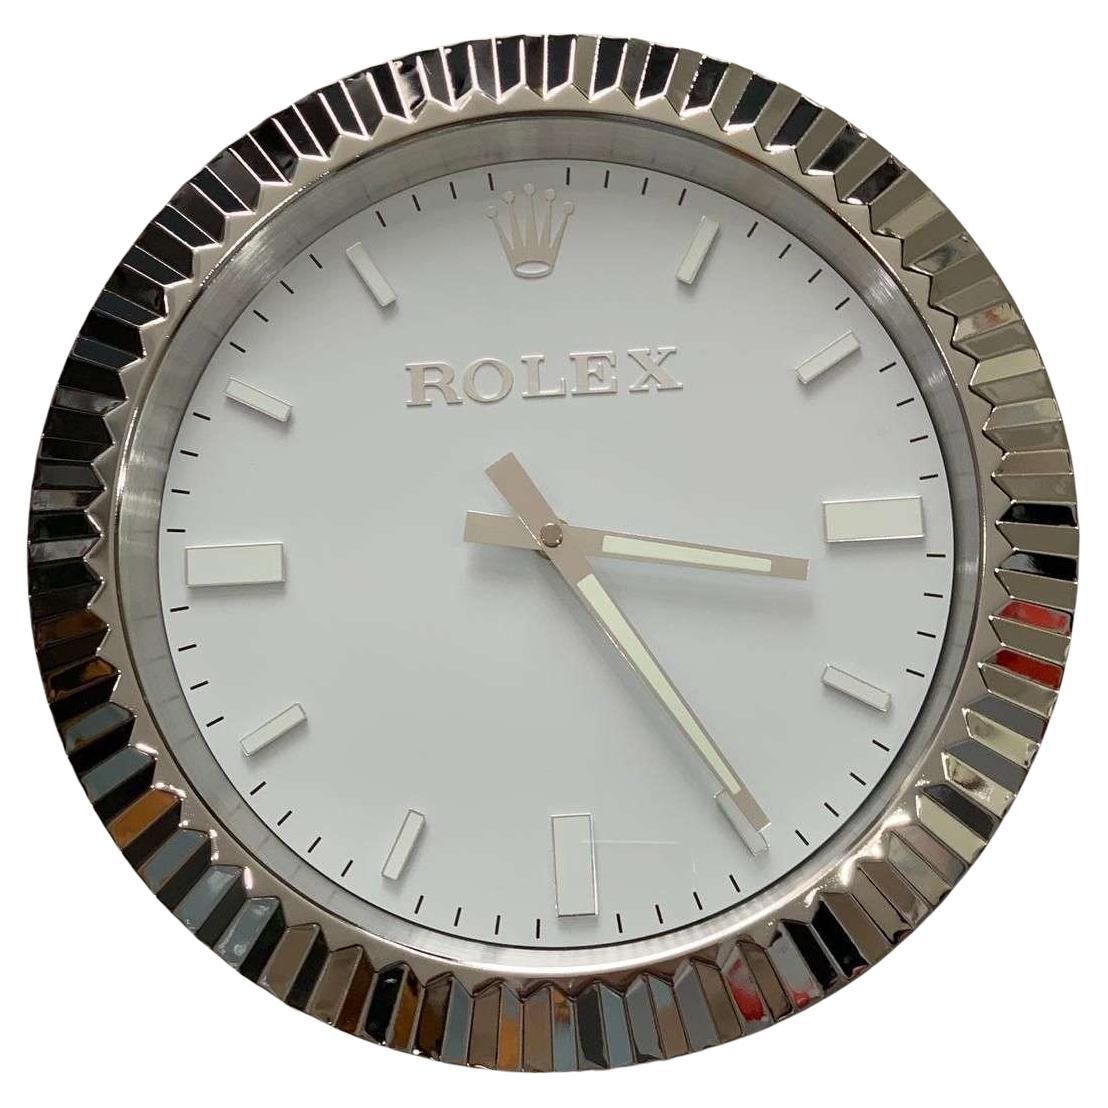 ROLEX Officially Certified Datejust Presidential Chrome Wall Clock 